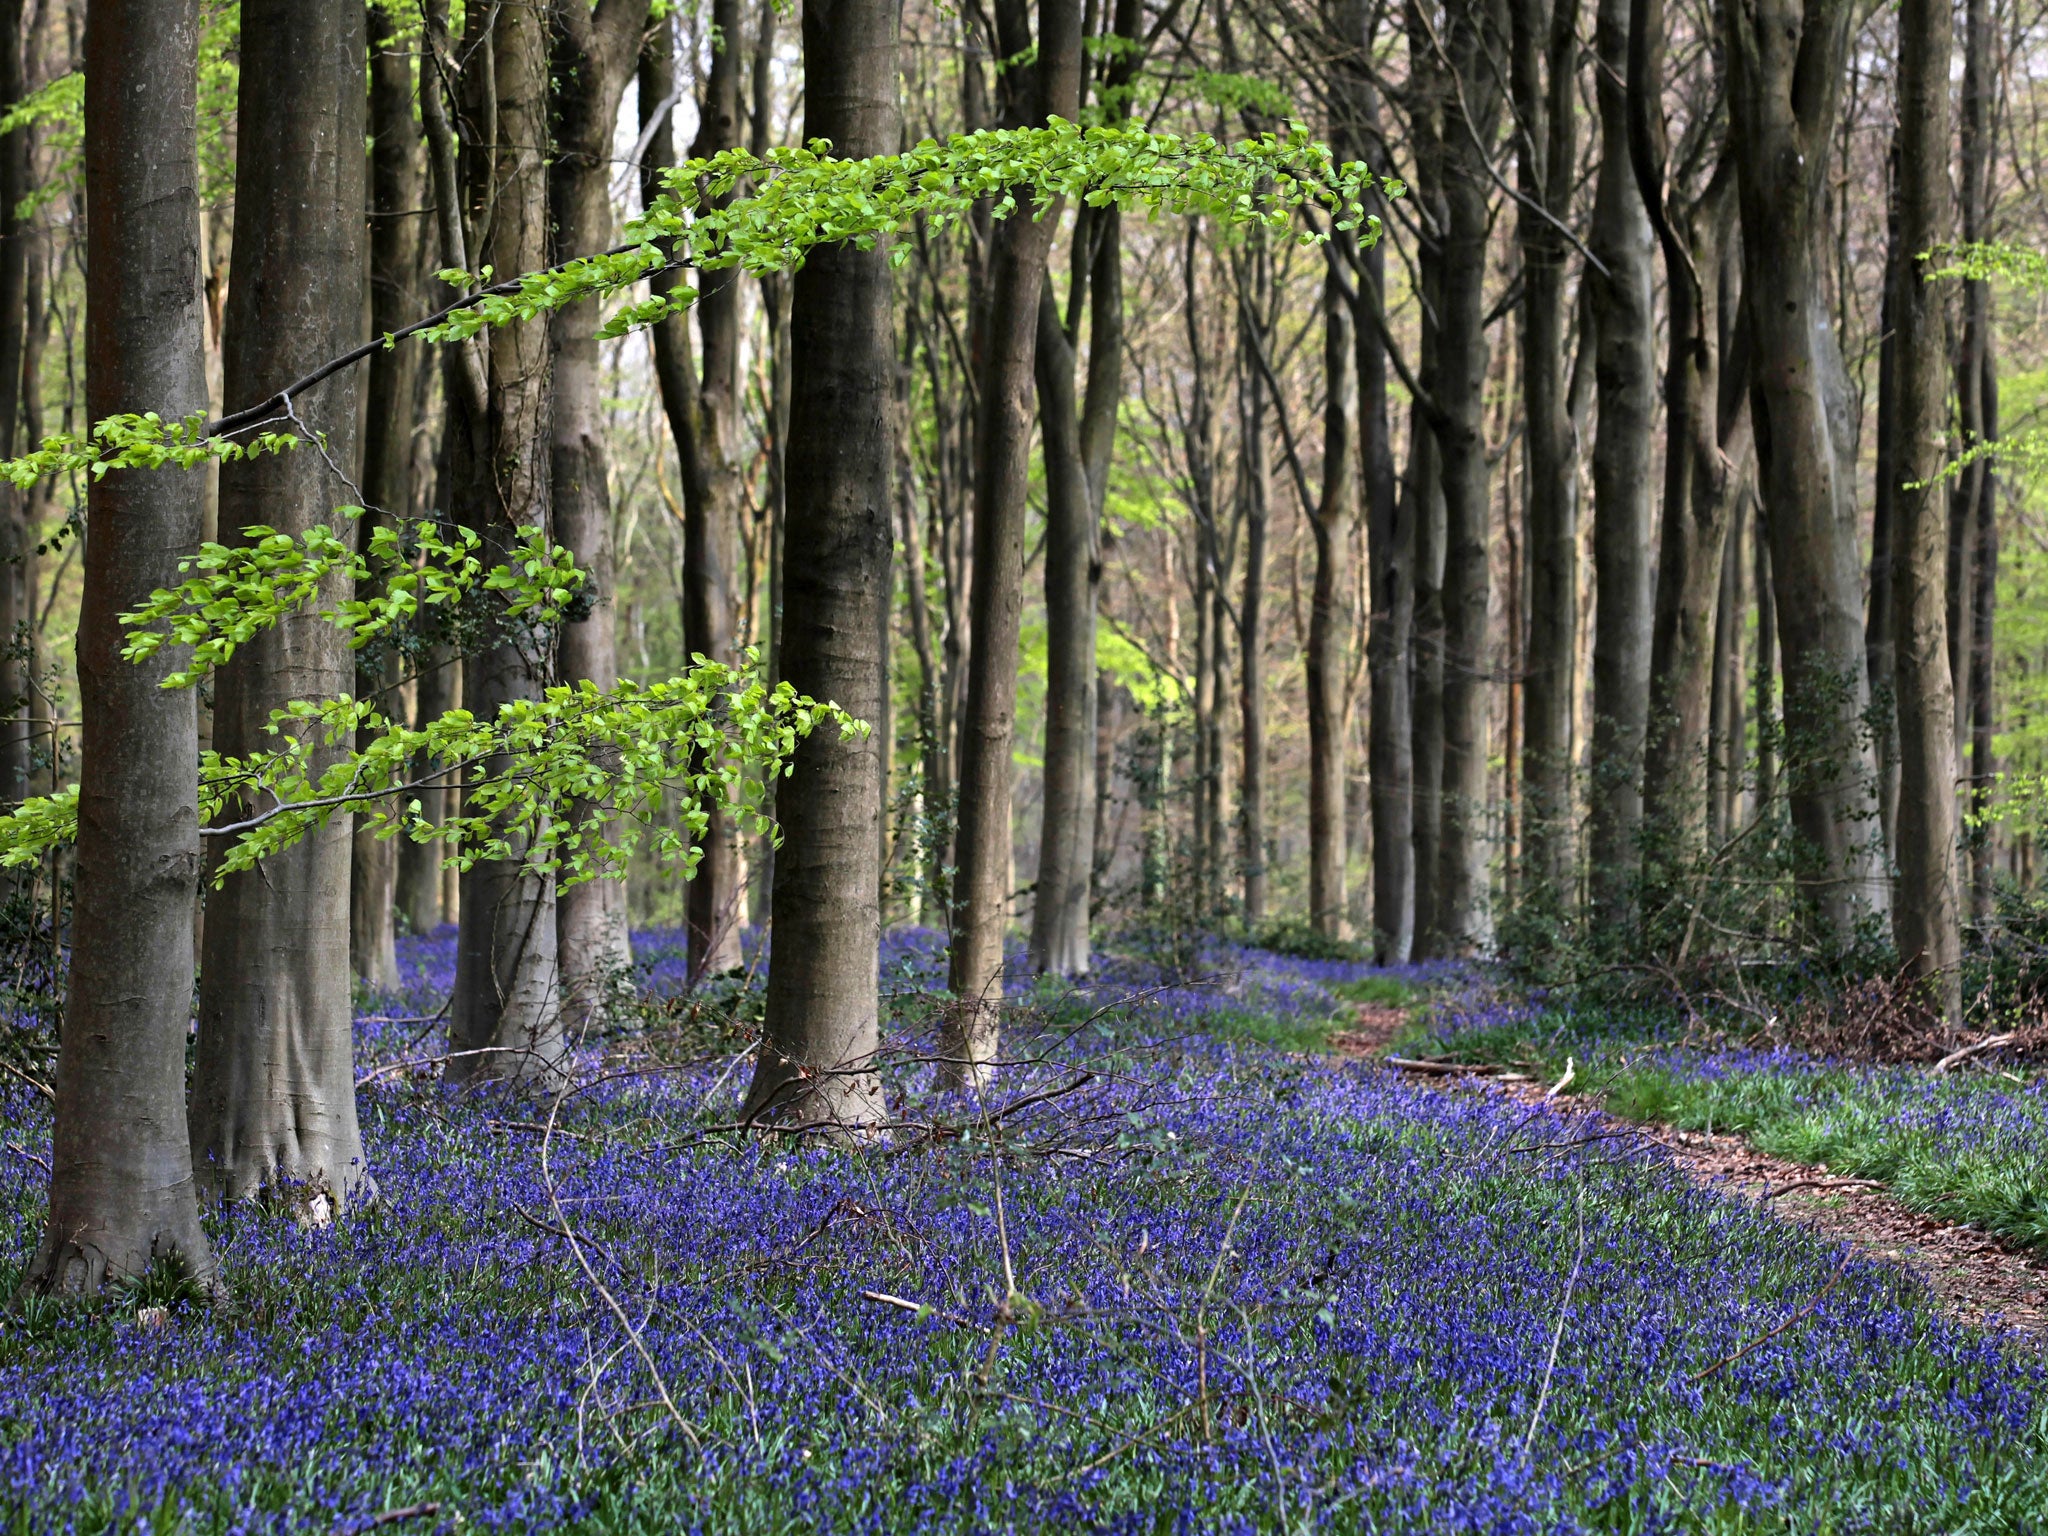 The Spanish bluebell is on the loose in Britain's woods, The Independent